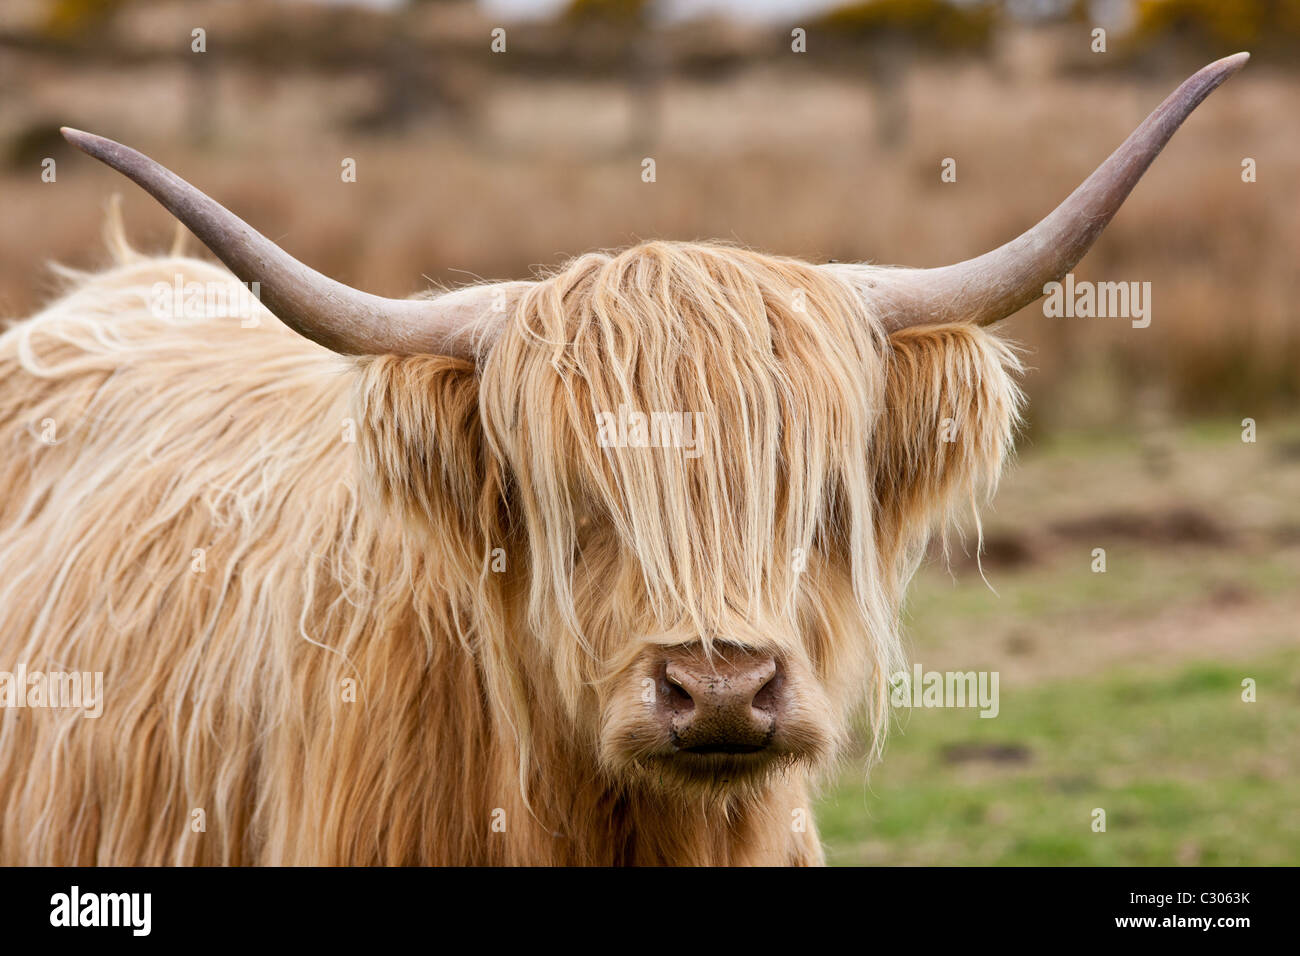 Blonde shaggy coated Highland cow with curved horns on Bodmin Moor, Cornwall Stock Photo